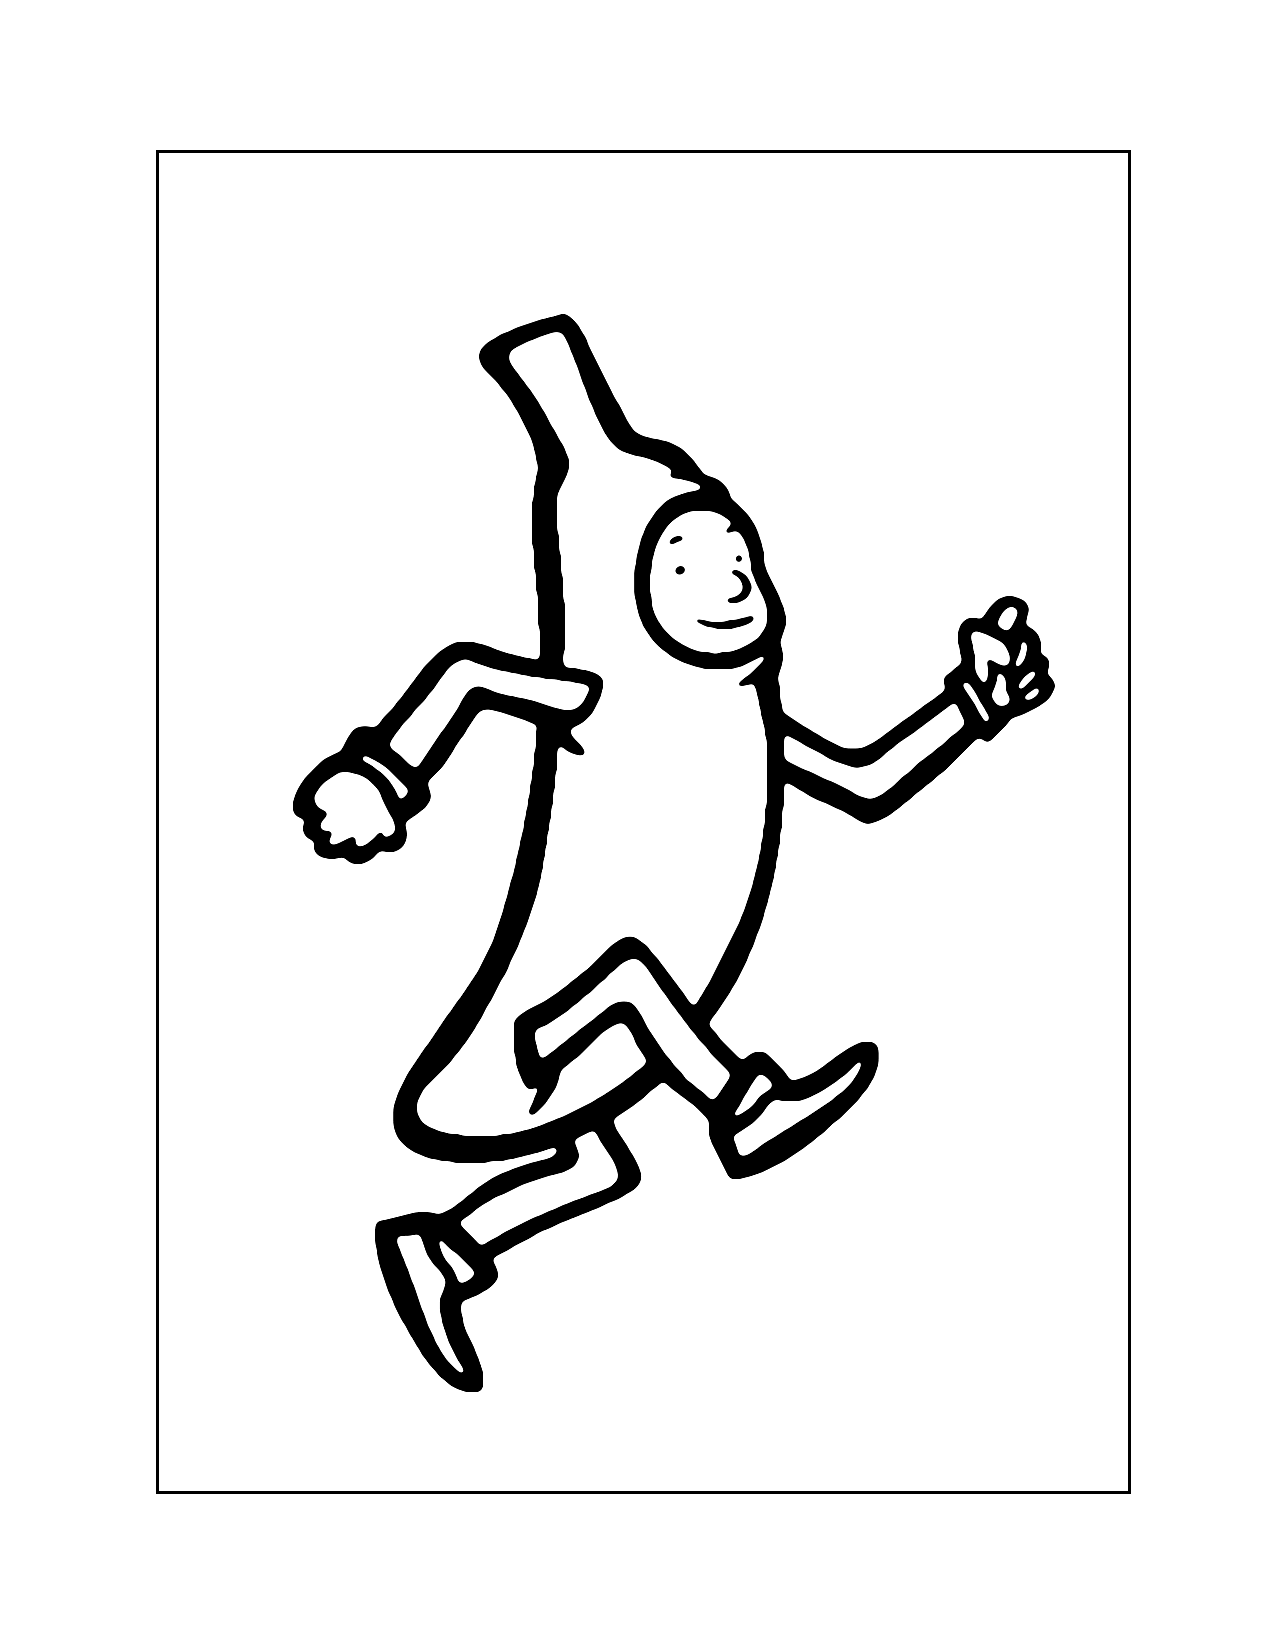 Funny Man In Banana Suit Coloring Page